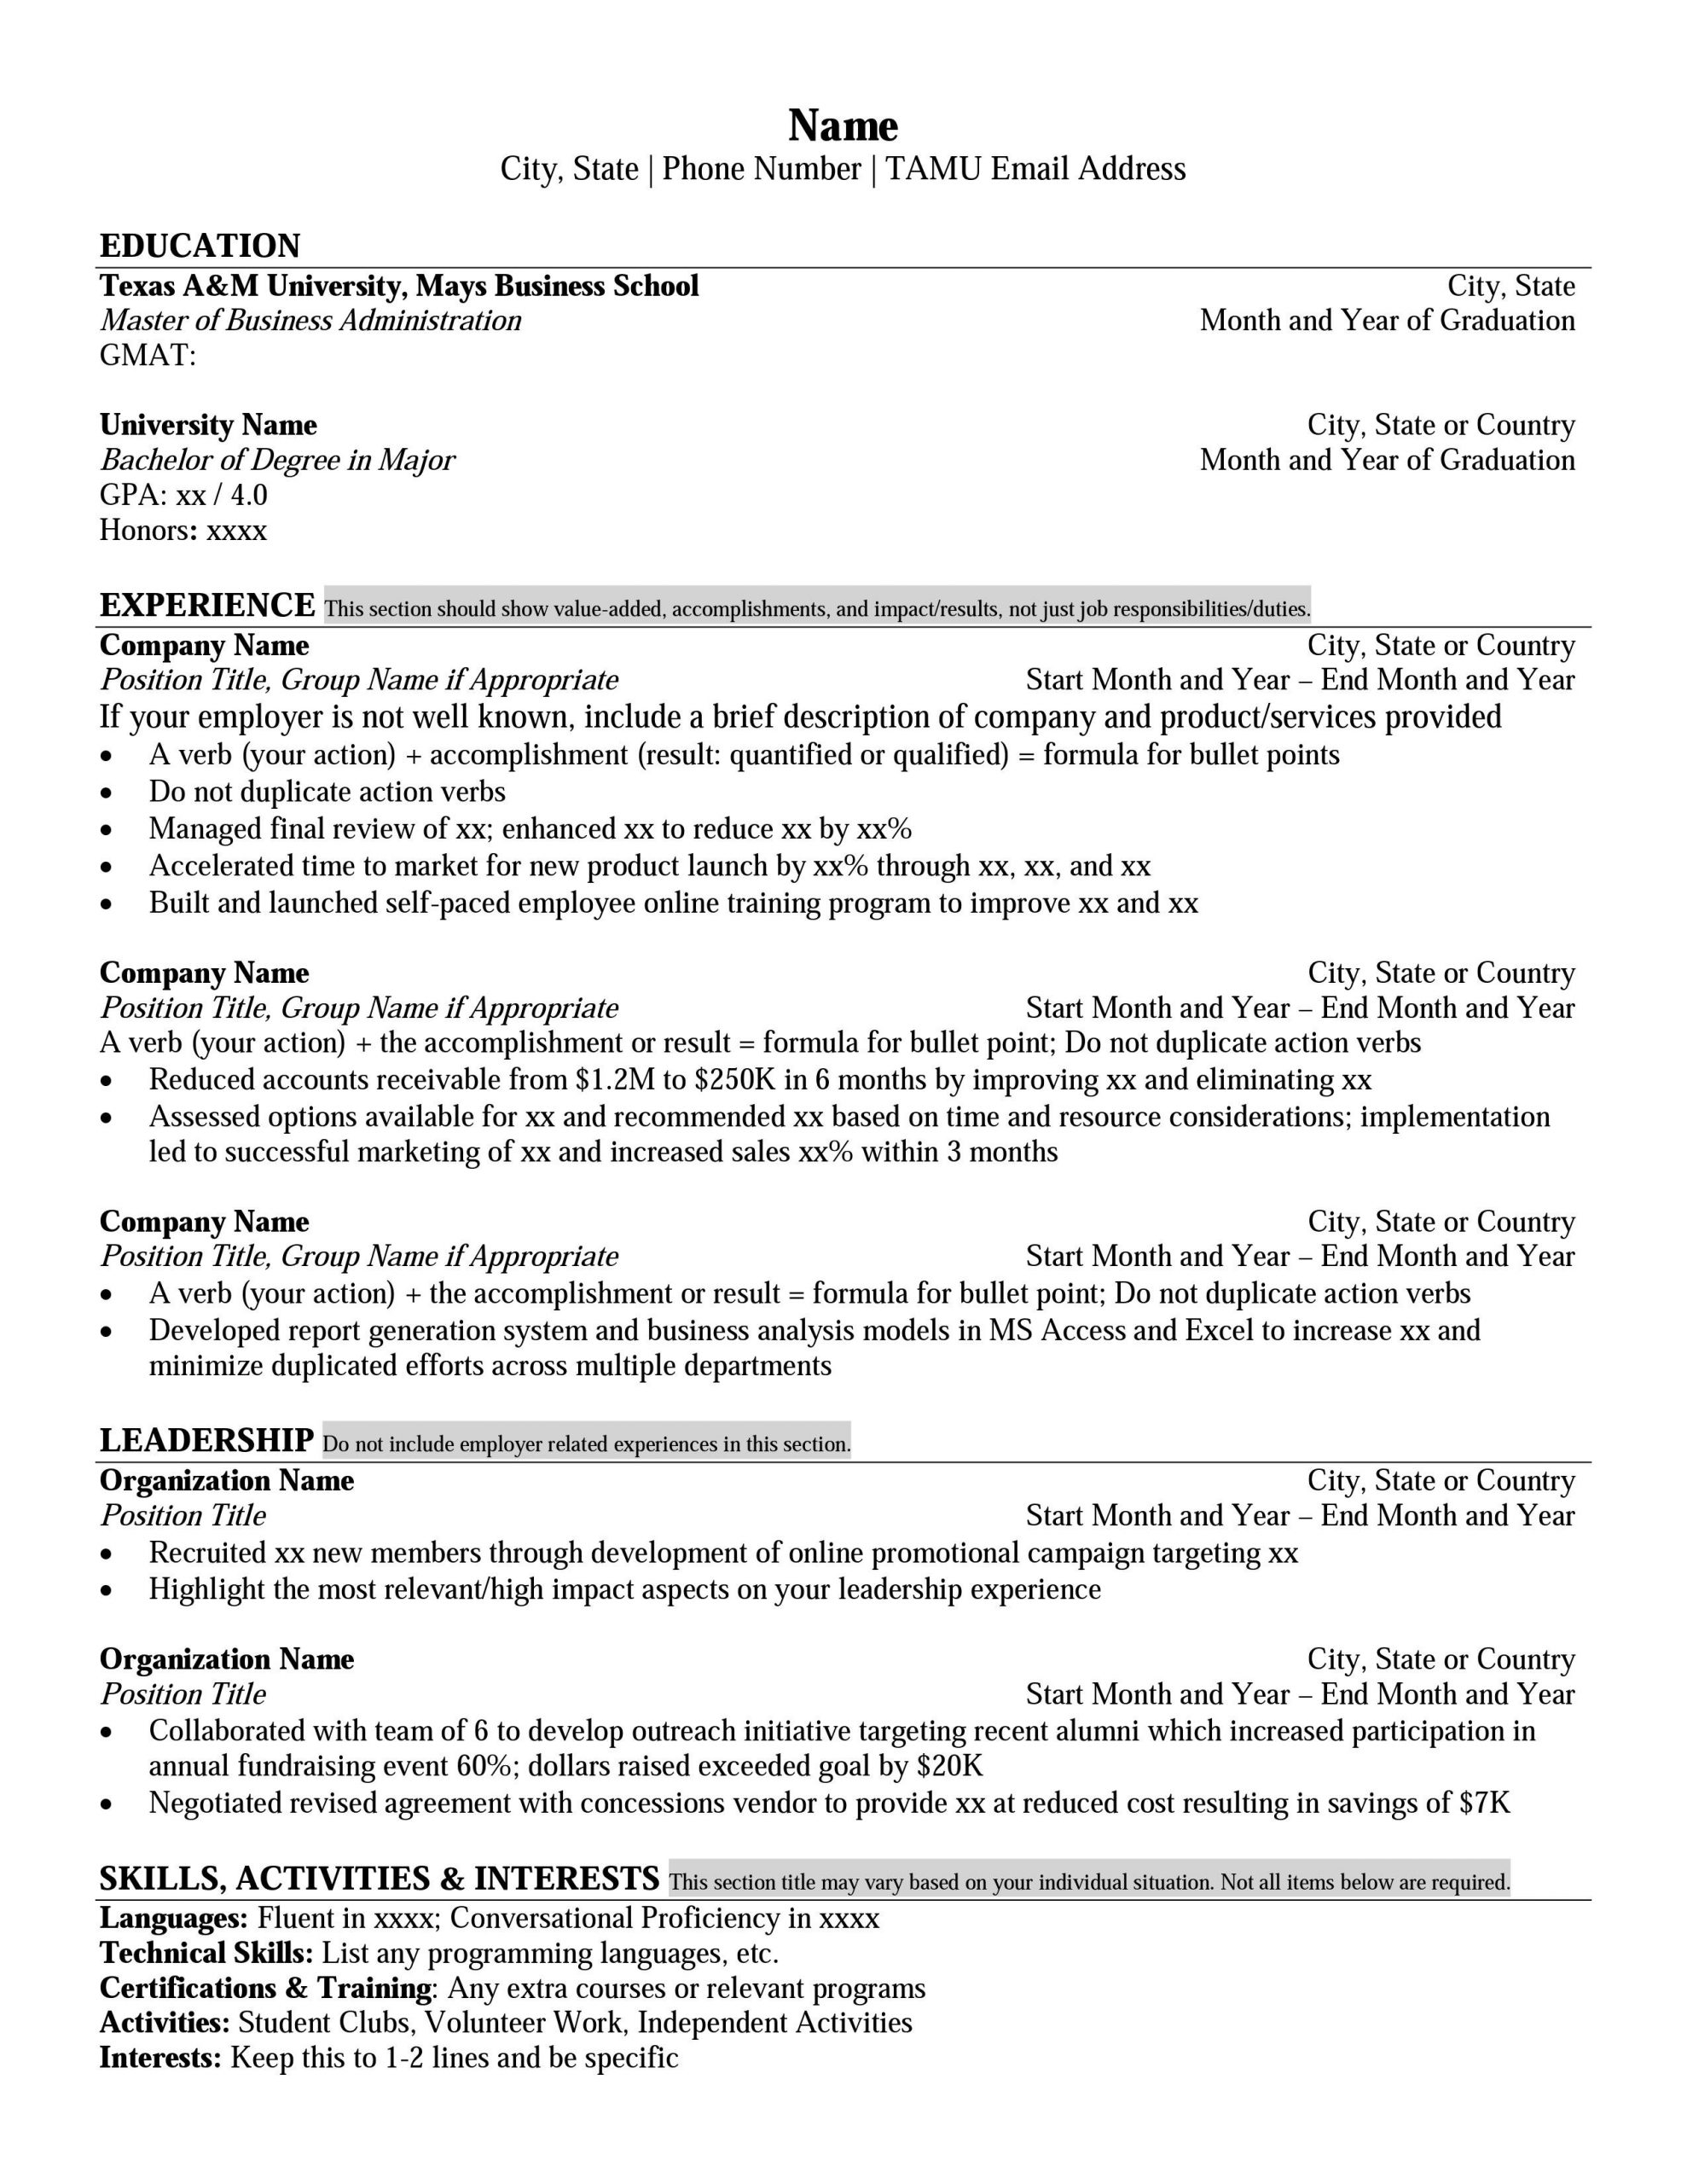 Sample Resume for Mba College Interview Mays Mba Resume format – Career Management Center